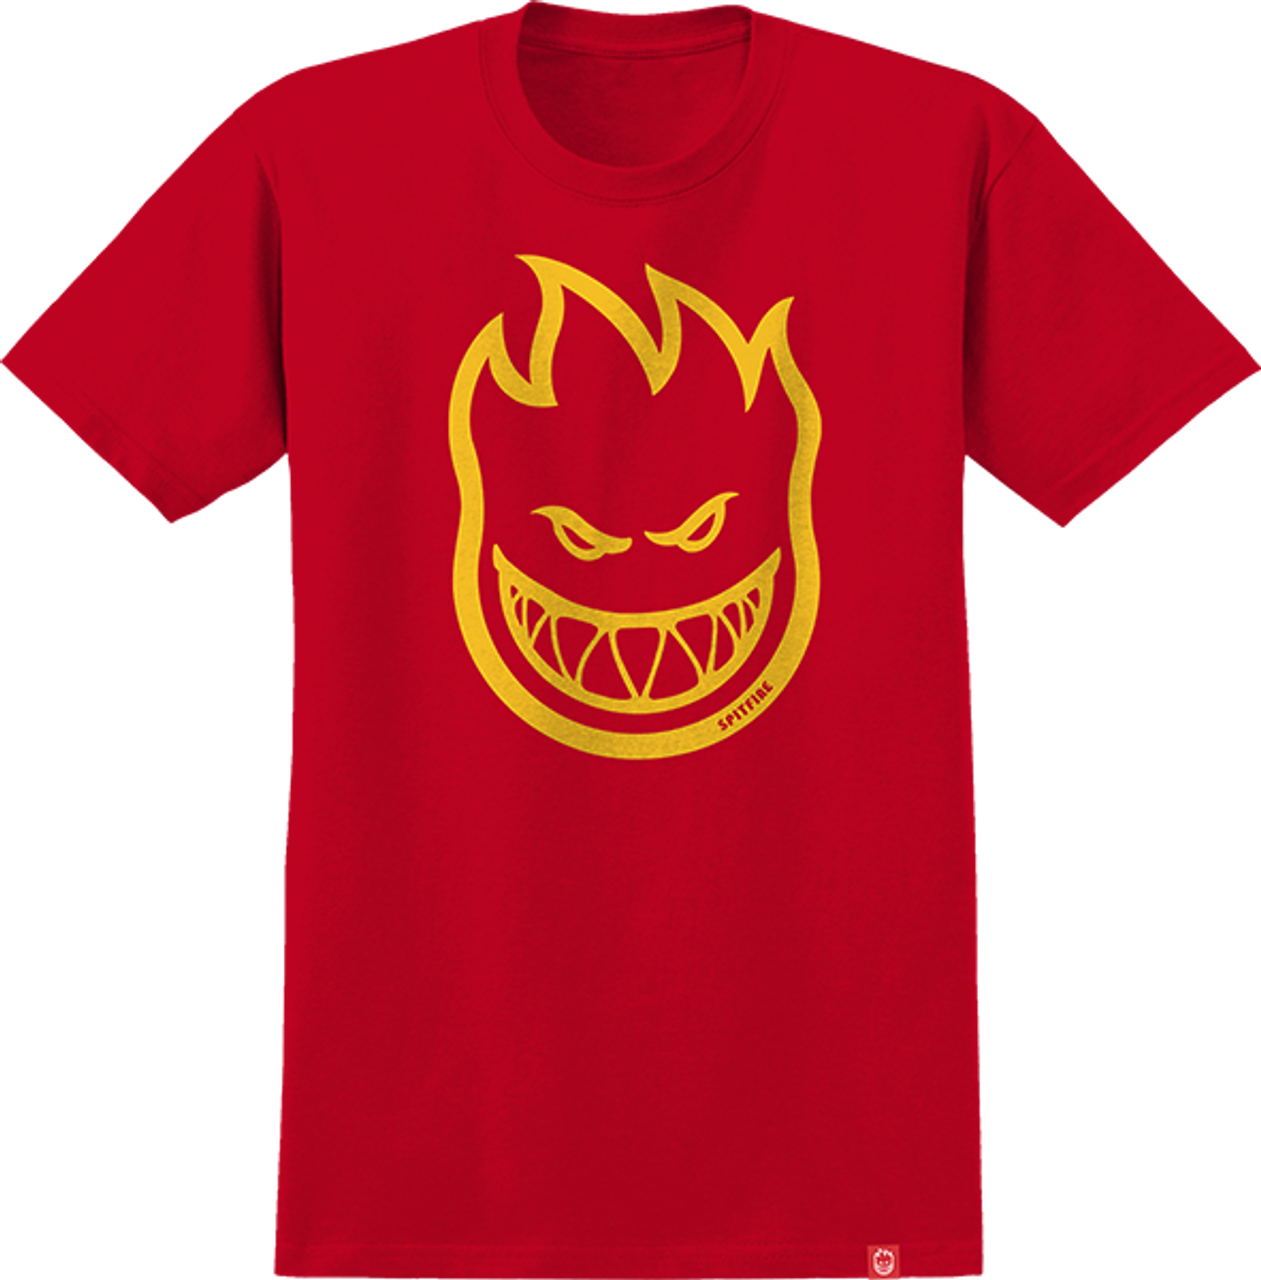 SPITFIRE BIGHEAD SS TSHIRT LARGE  RED/GOLD